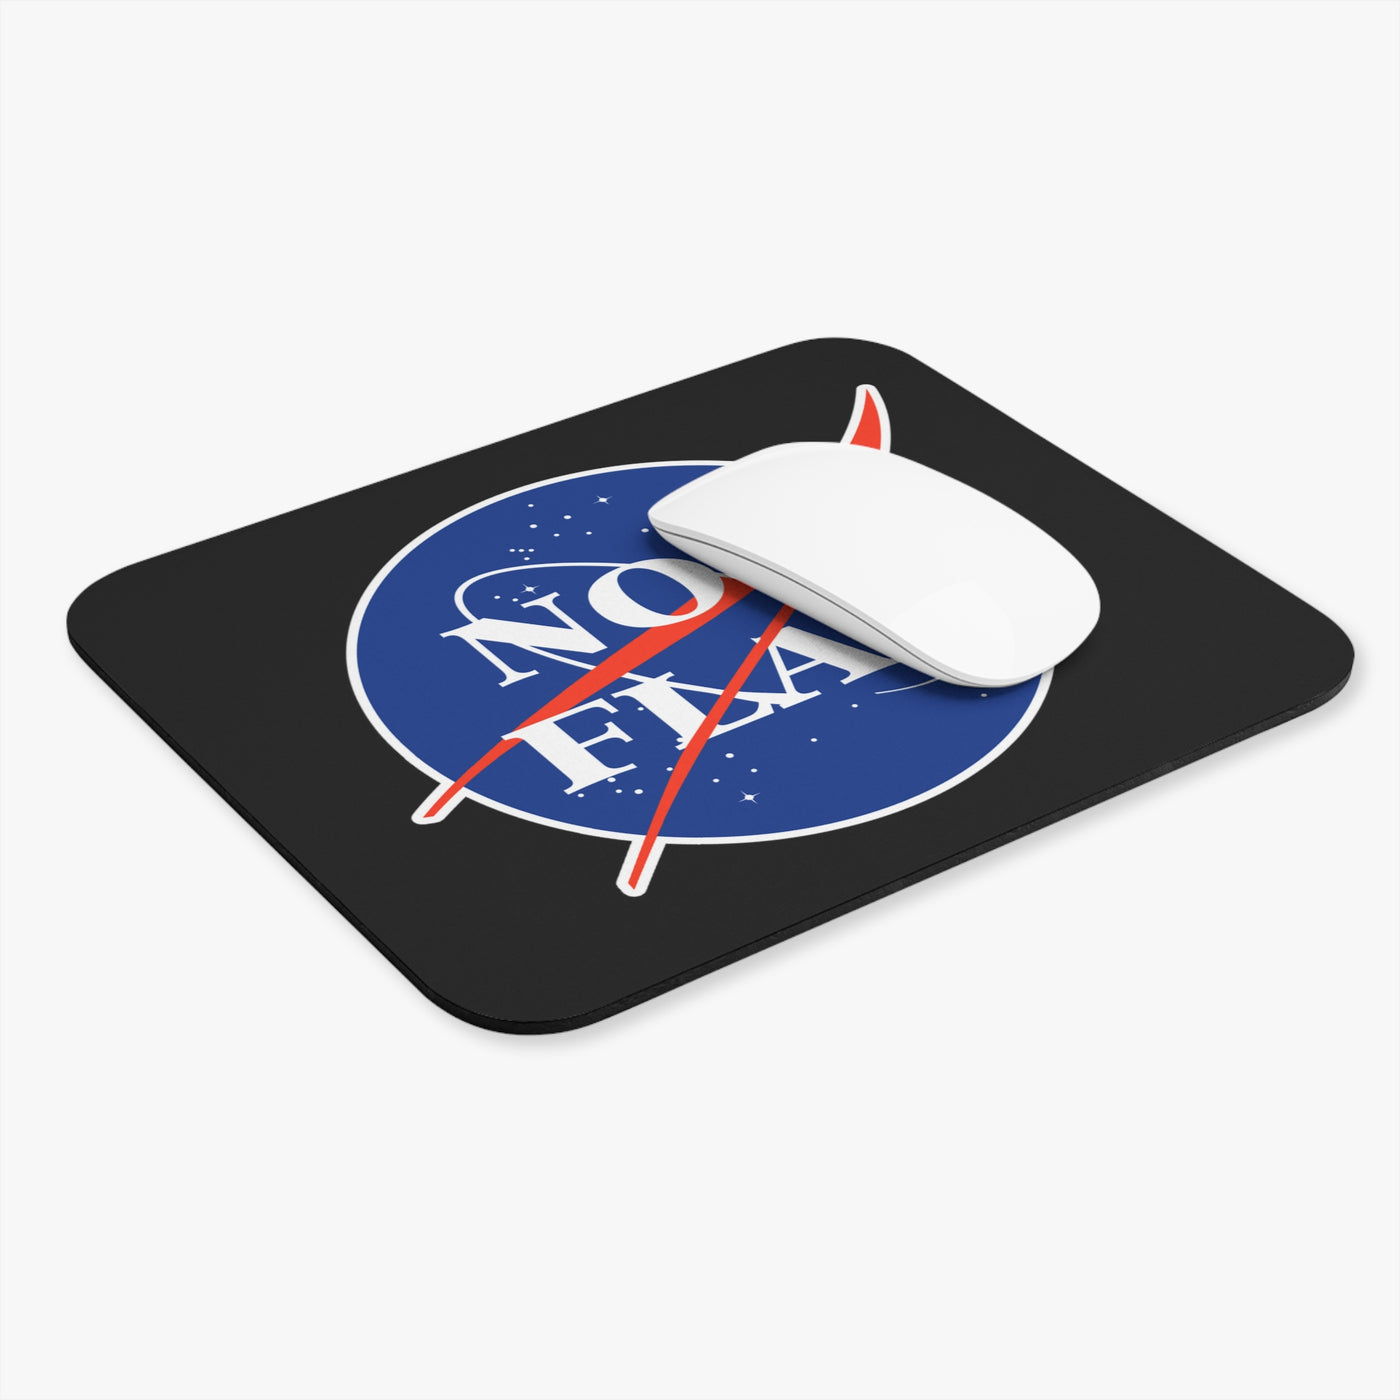 Not Flat - Mouse Pad 9x8